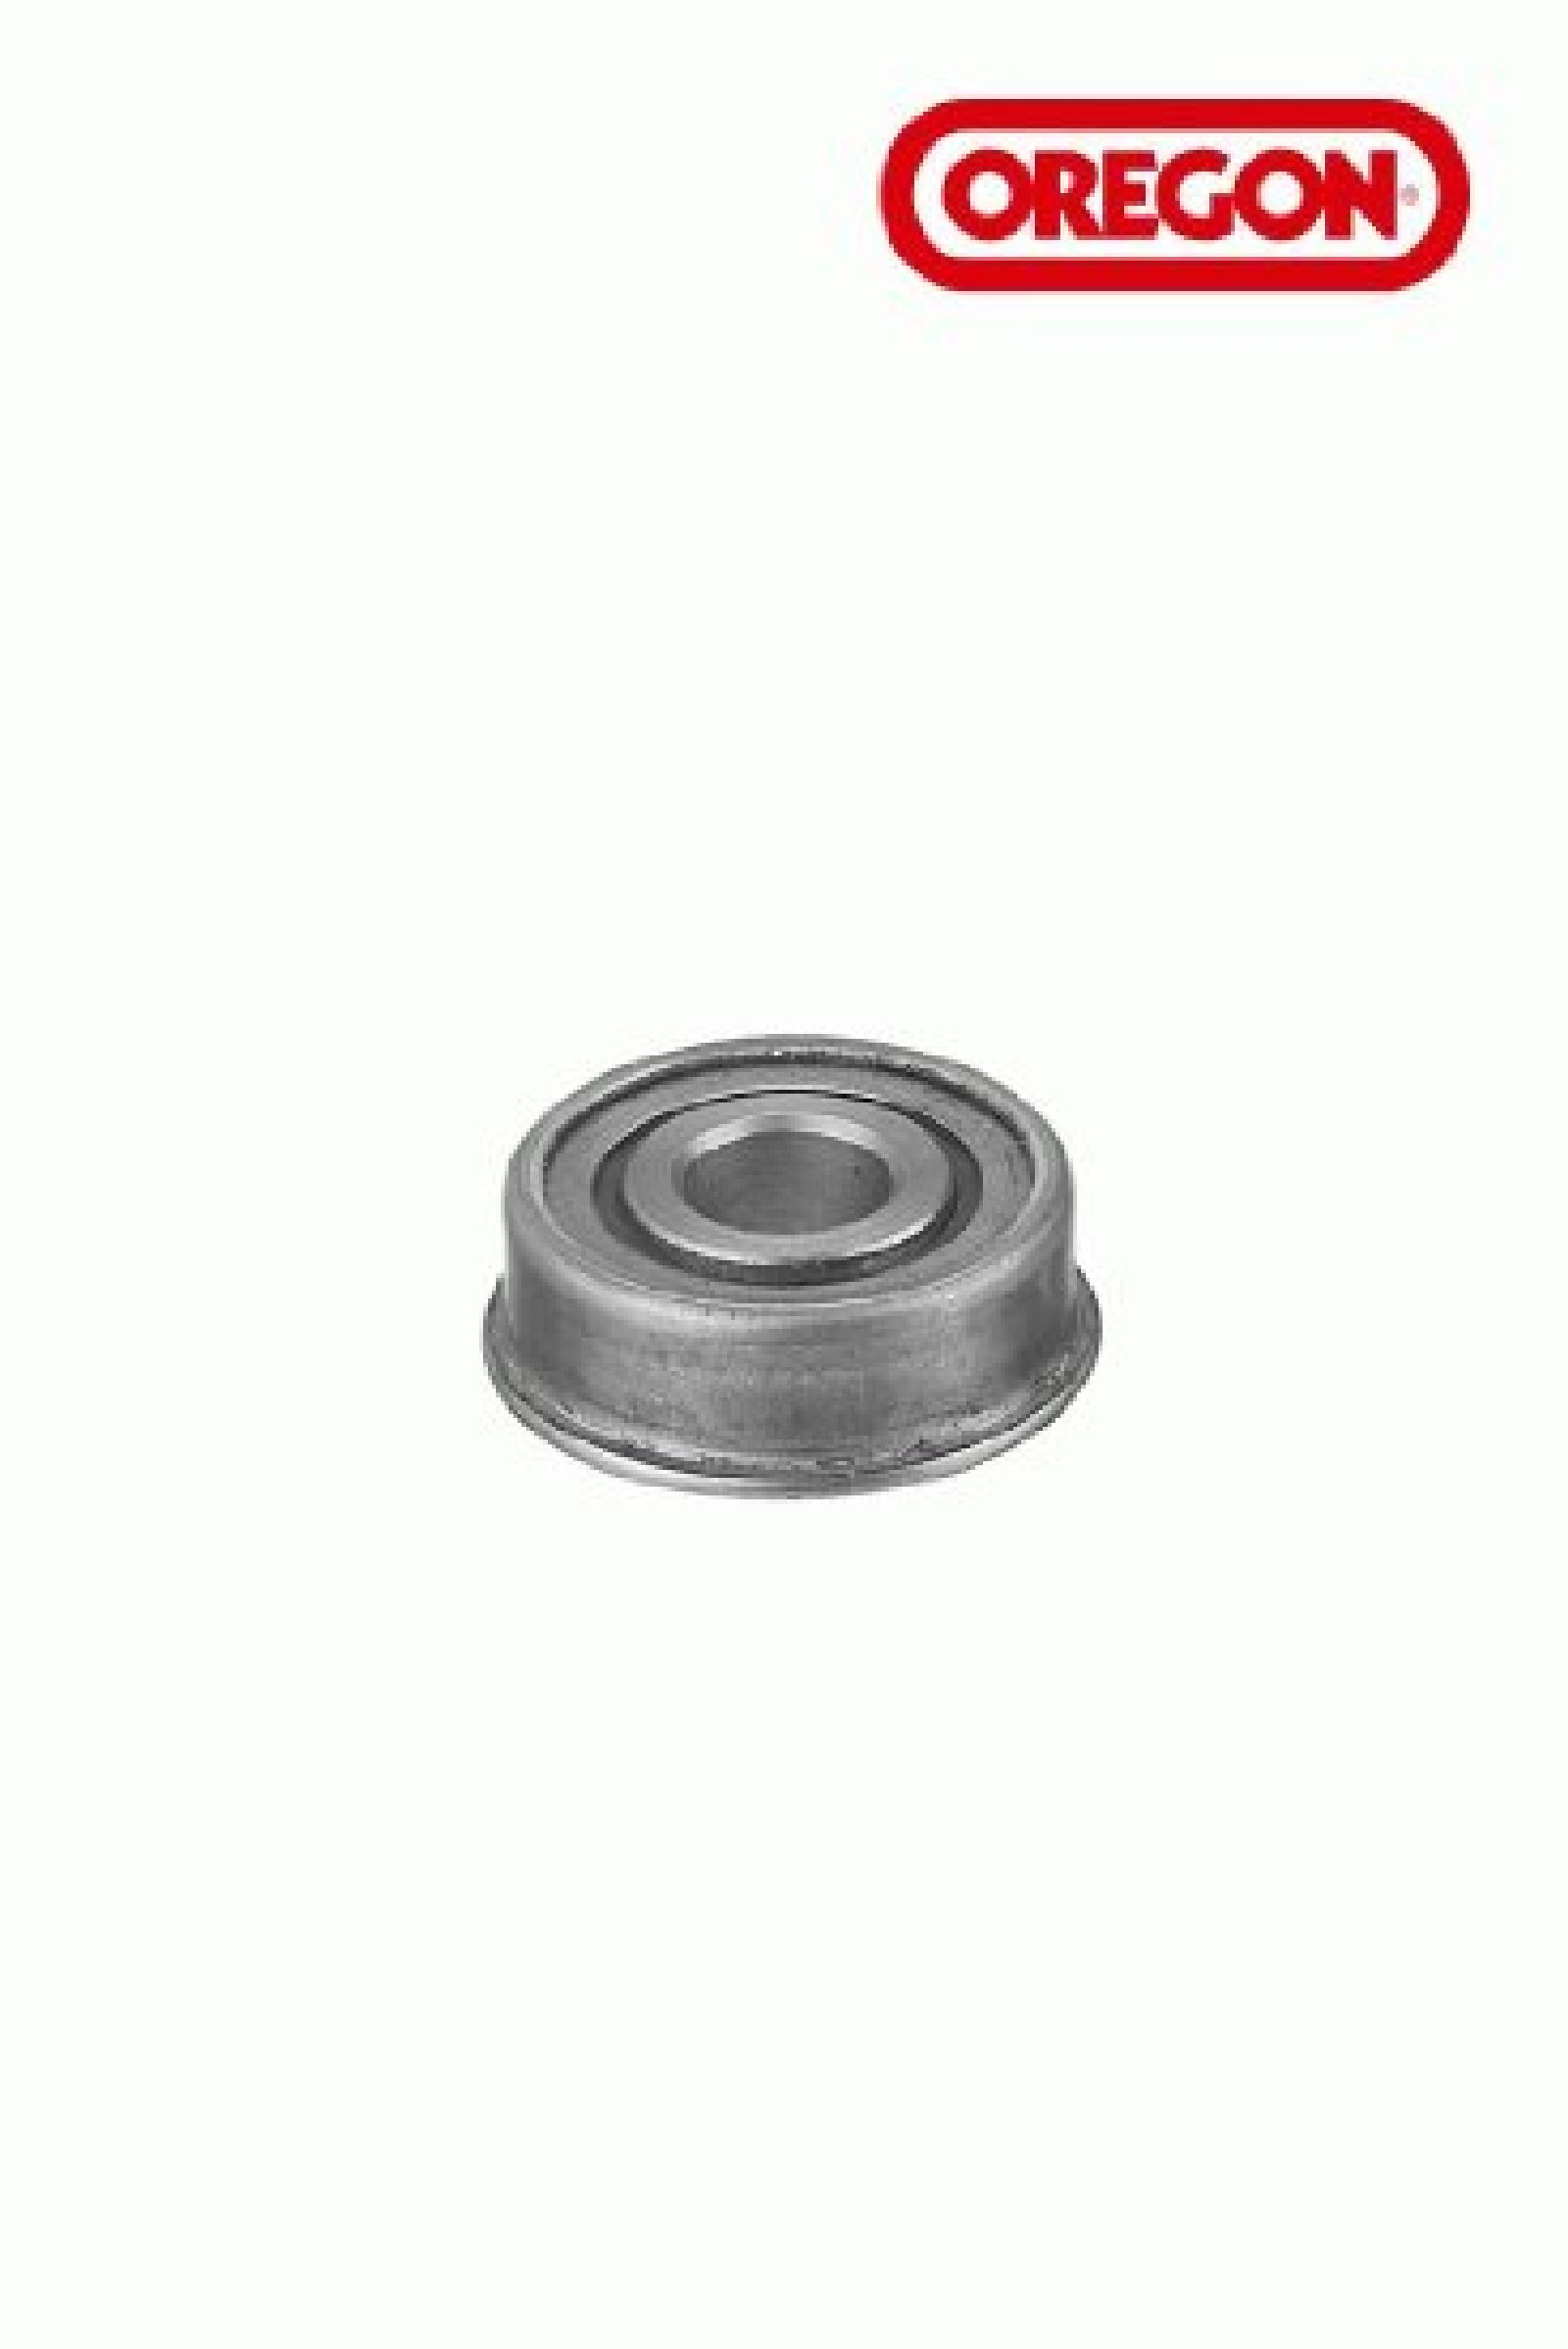 BEARNG, FLANGED BALL 3/4I part# 45-034 by Oregon - Click Image to Close